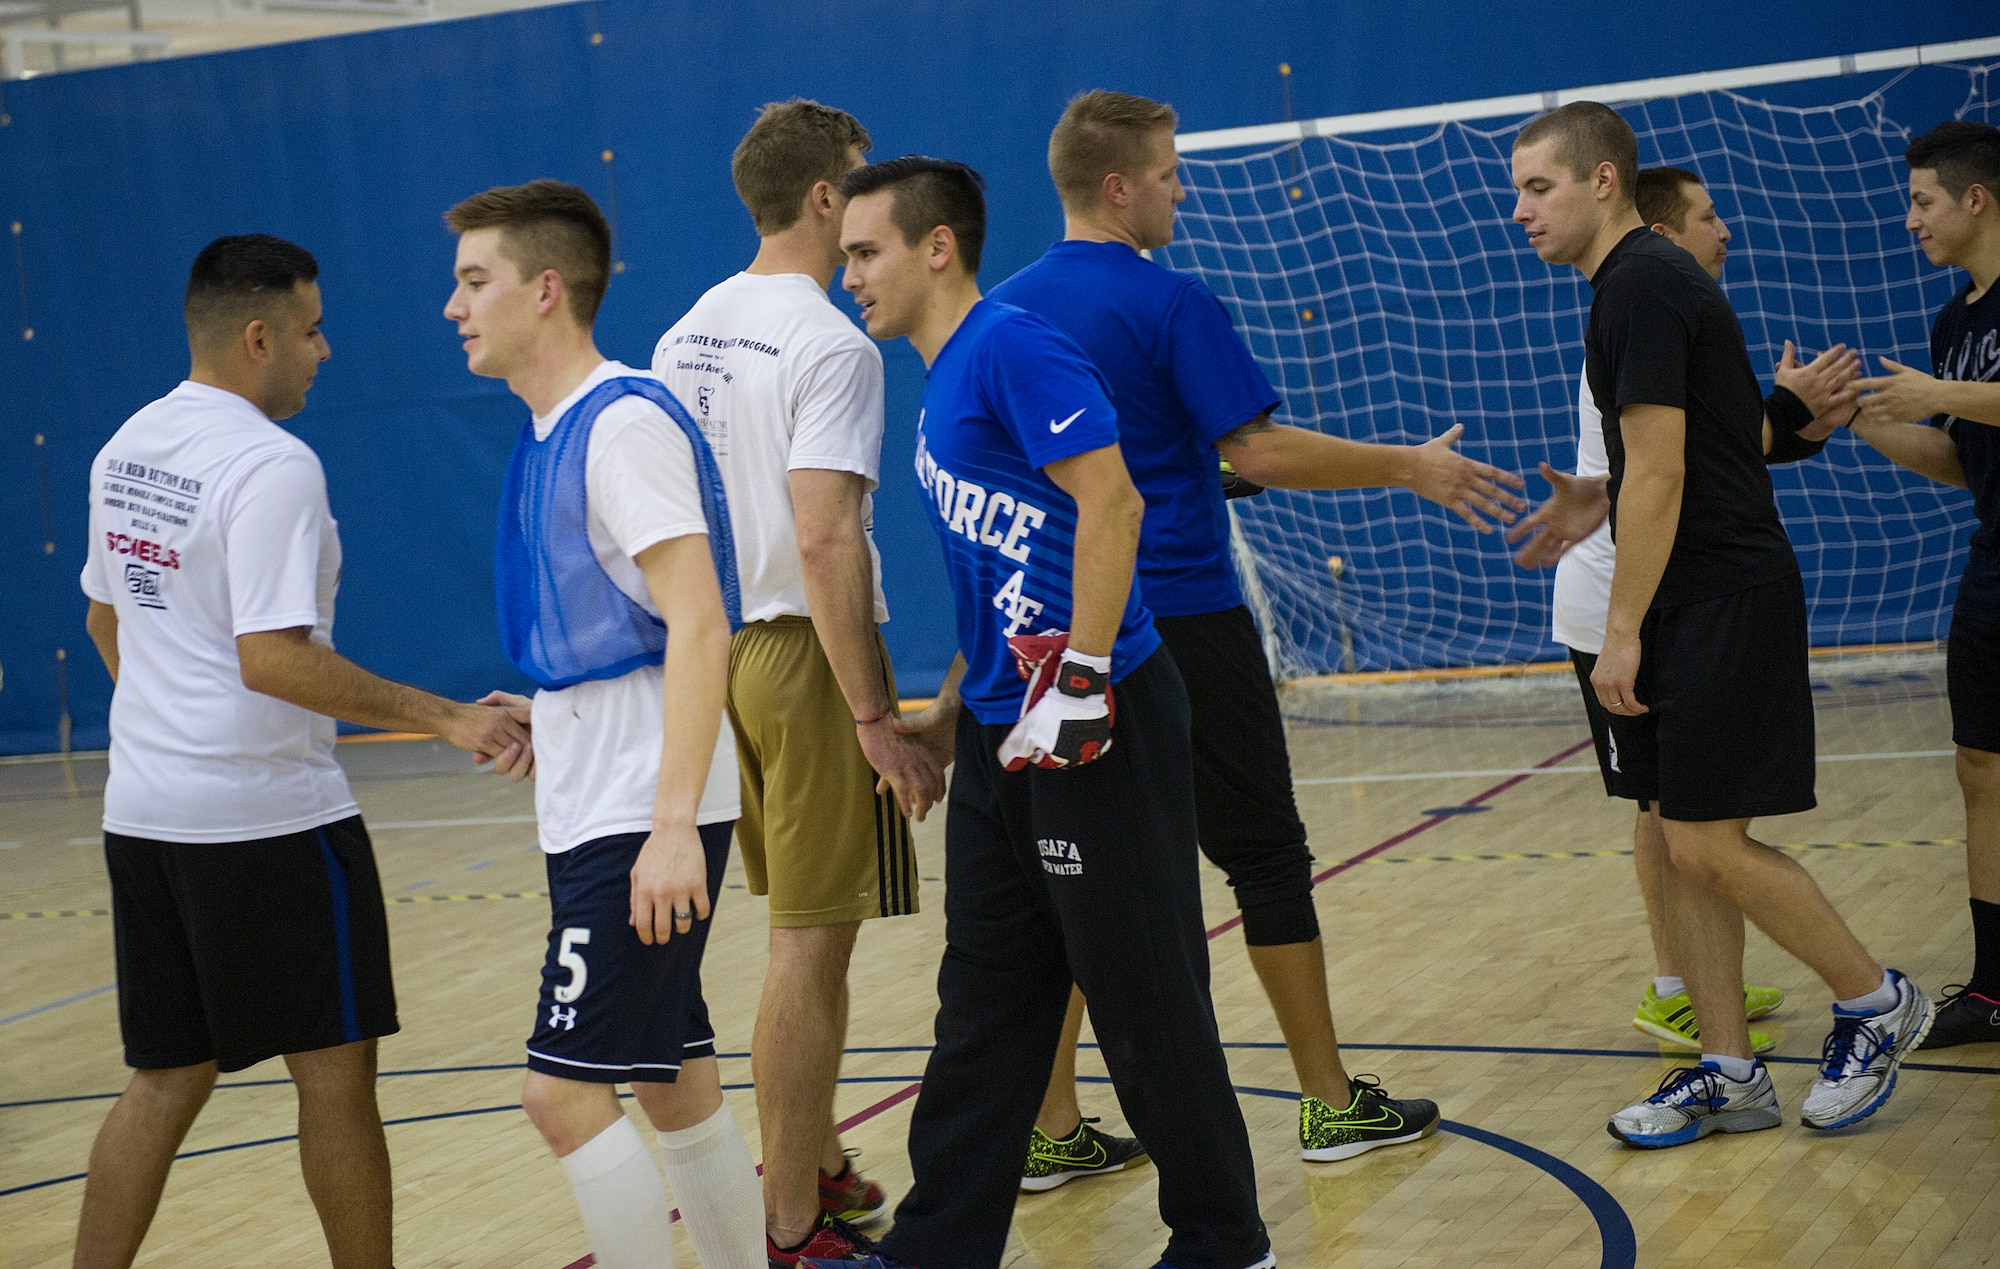 The 5th Contracting Squadron and 5th Medical Group teams shake hands after the intramural indoor soccer championship at Minot Air Force Base, N.D., Nov. 24, 2015. After coming down to penalty kicks, 5th CONS won the shootout by one goal. (U.S. Air Force photo/Senior Airman Apryl Hall)